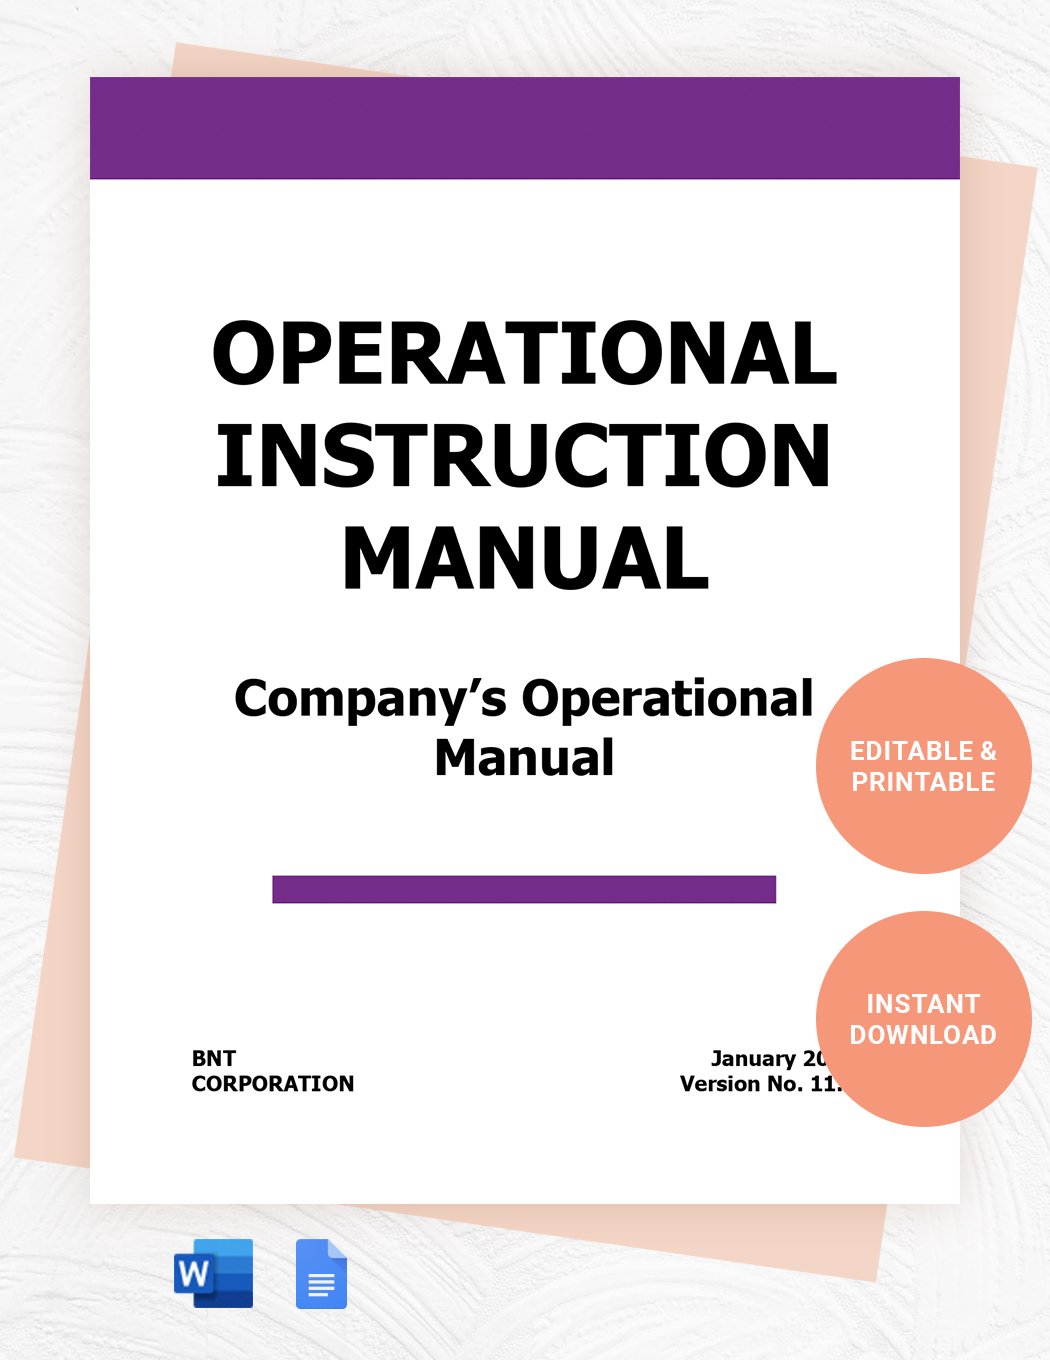 Operational Instruction Manual Template Download in Word, Google Docs